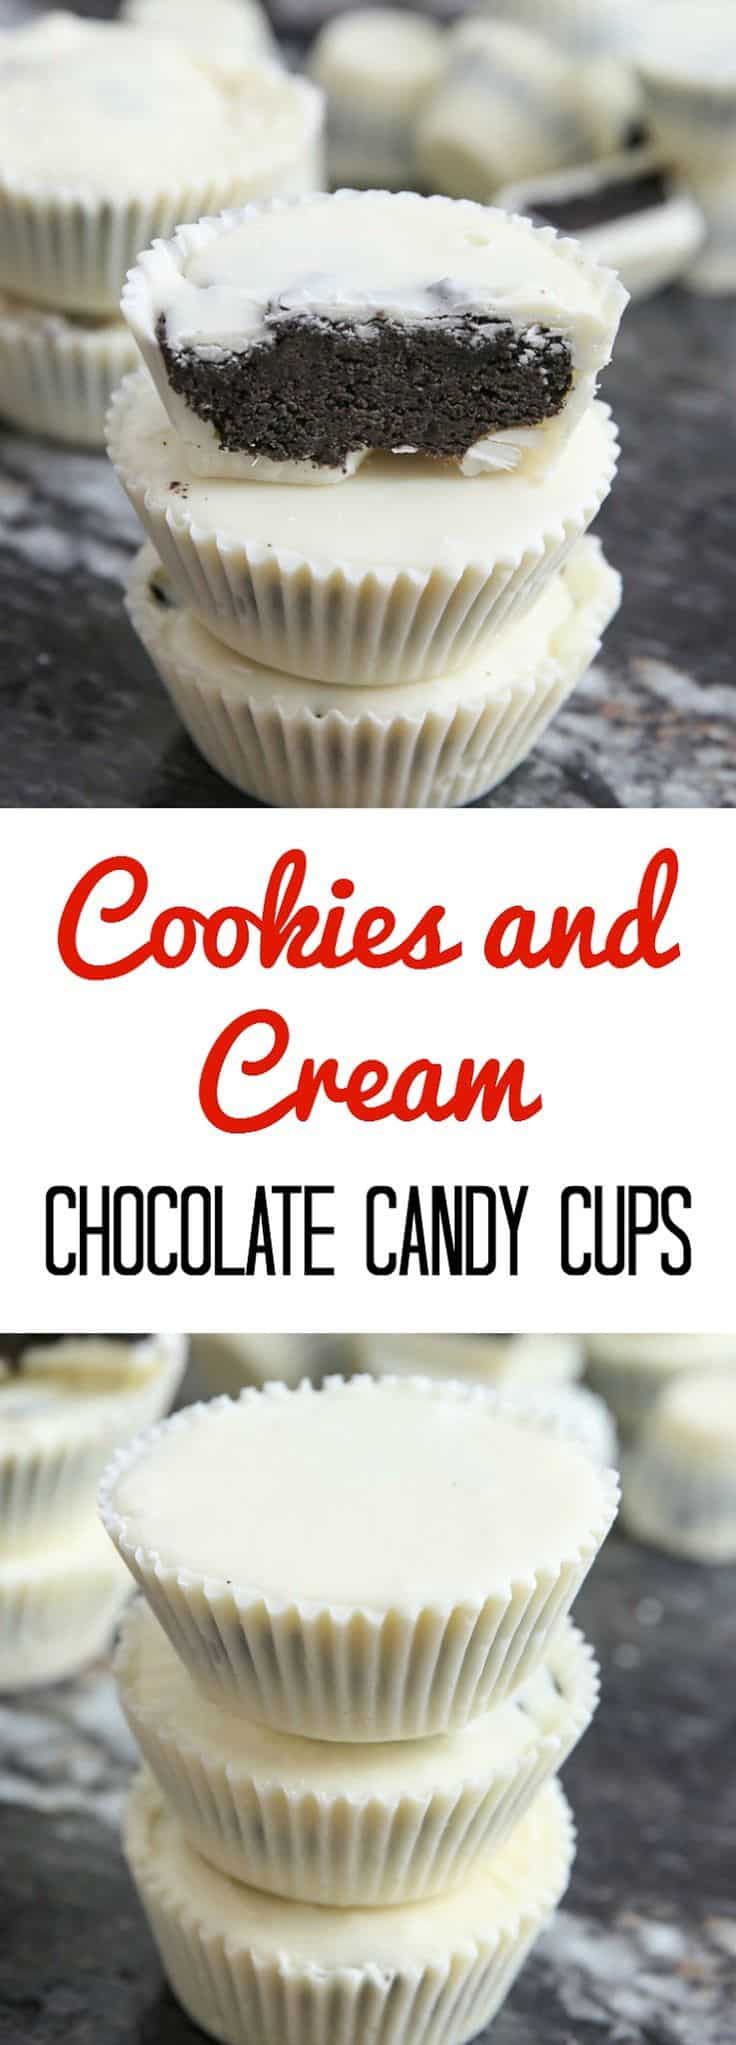 Cookies n' cream chocolate candy cups